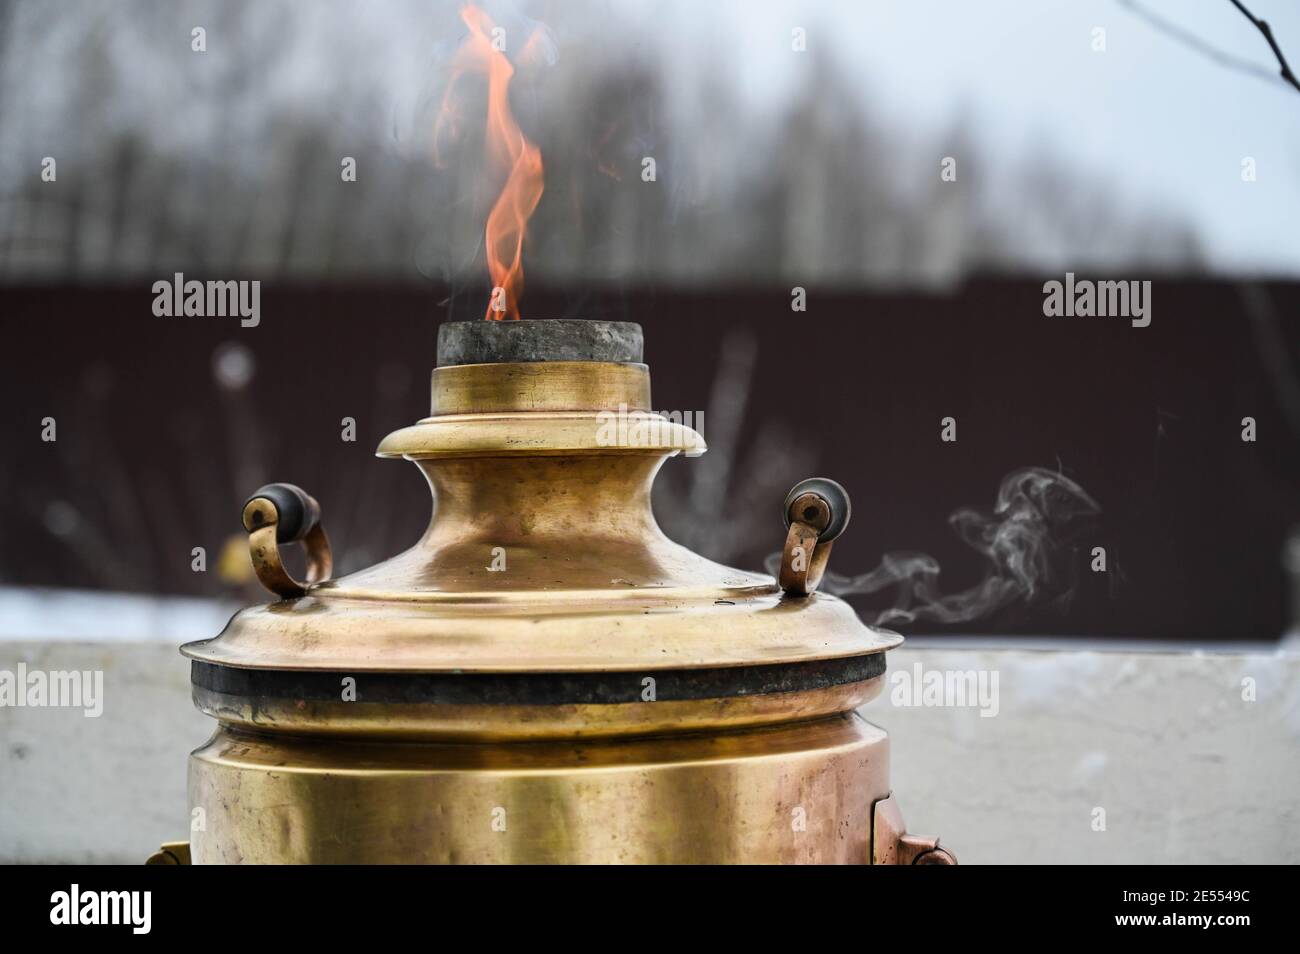 Russian Samovar In The Kitchen Stock Photo, Picture and Royalty Free Image.  Image 96081428.